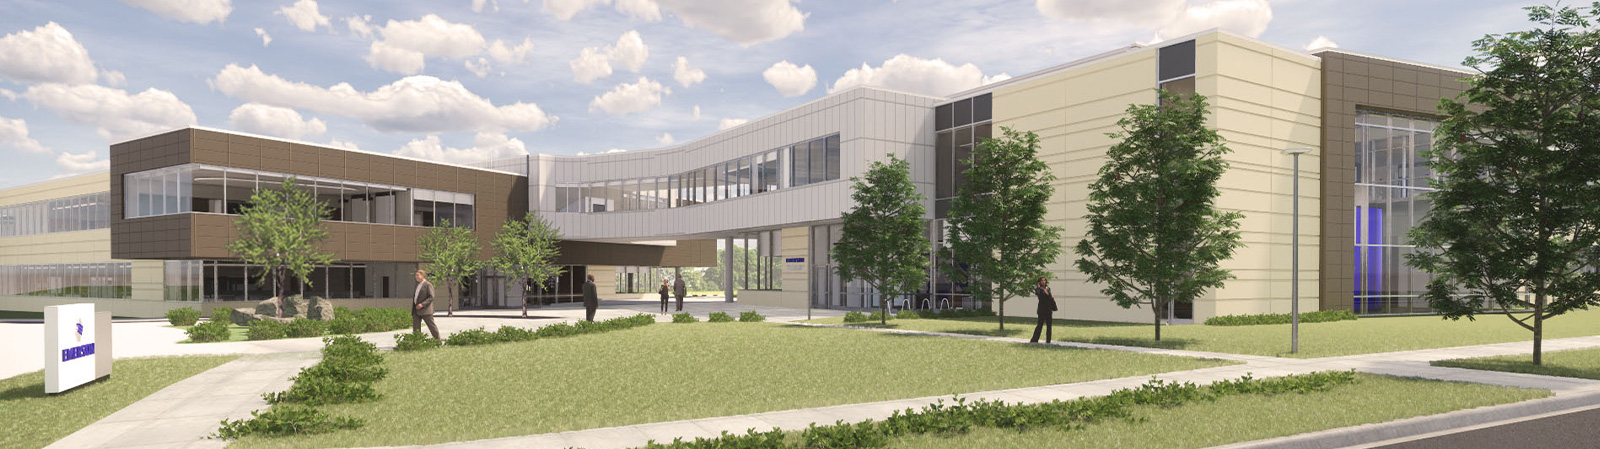 Emerson’s Flow Innovation Center and expanded manufacturing space will feature an 85,000-square foot laboratory and hands-on Interactive Plant Environment.